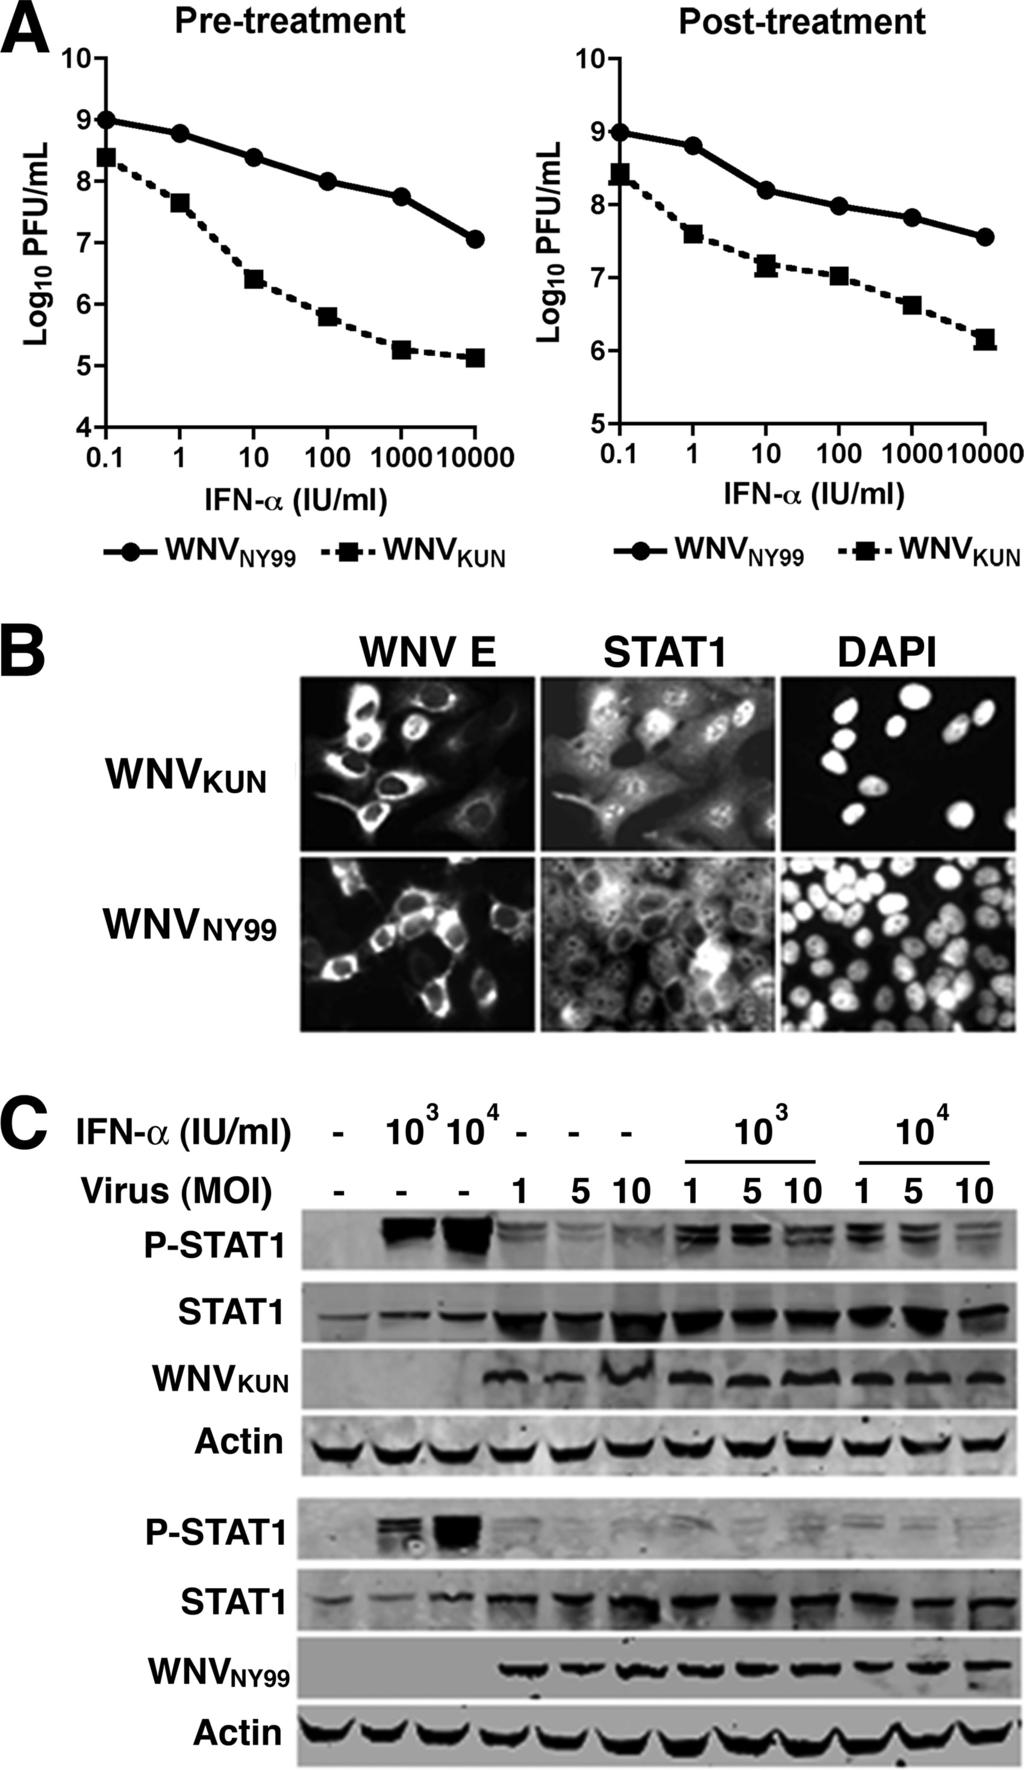 VOL. 85, 2011 NOTES 5665 FIG. 1. WNV KUN antagonizes IFN- antiviral effects less efficiently than WNV NY99. (A) Effects of pre- or posttreatment of IFN- on WNV production.